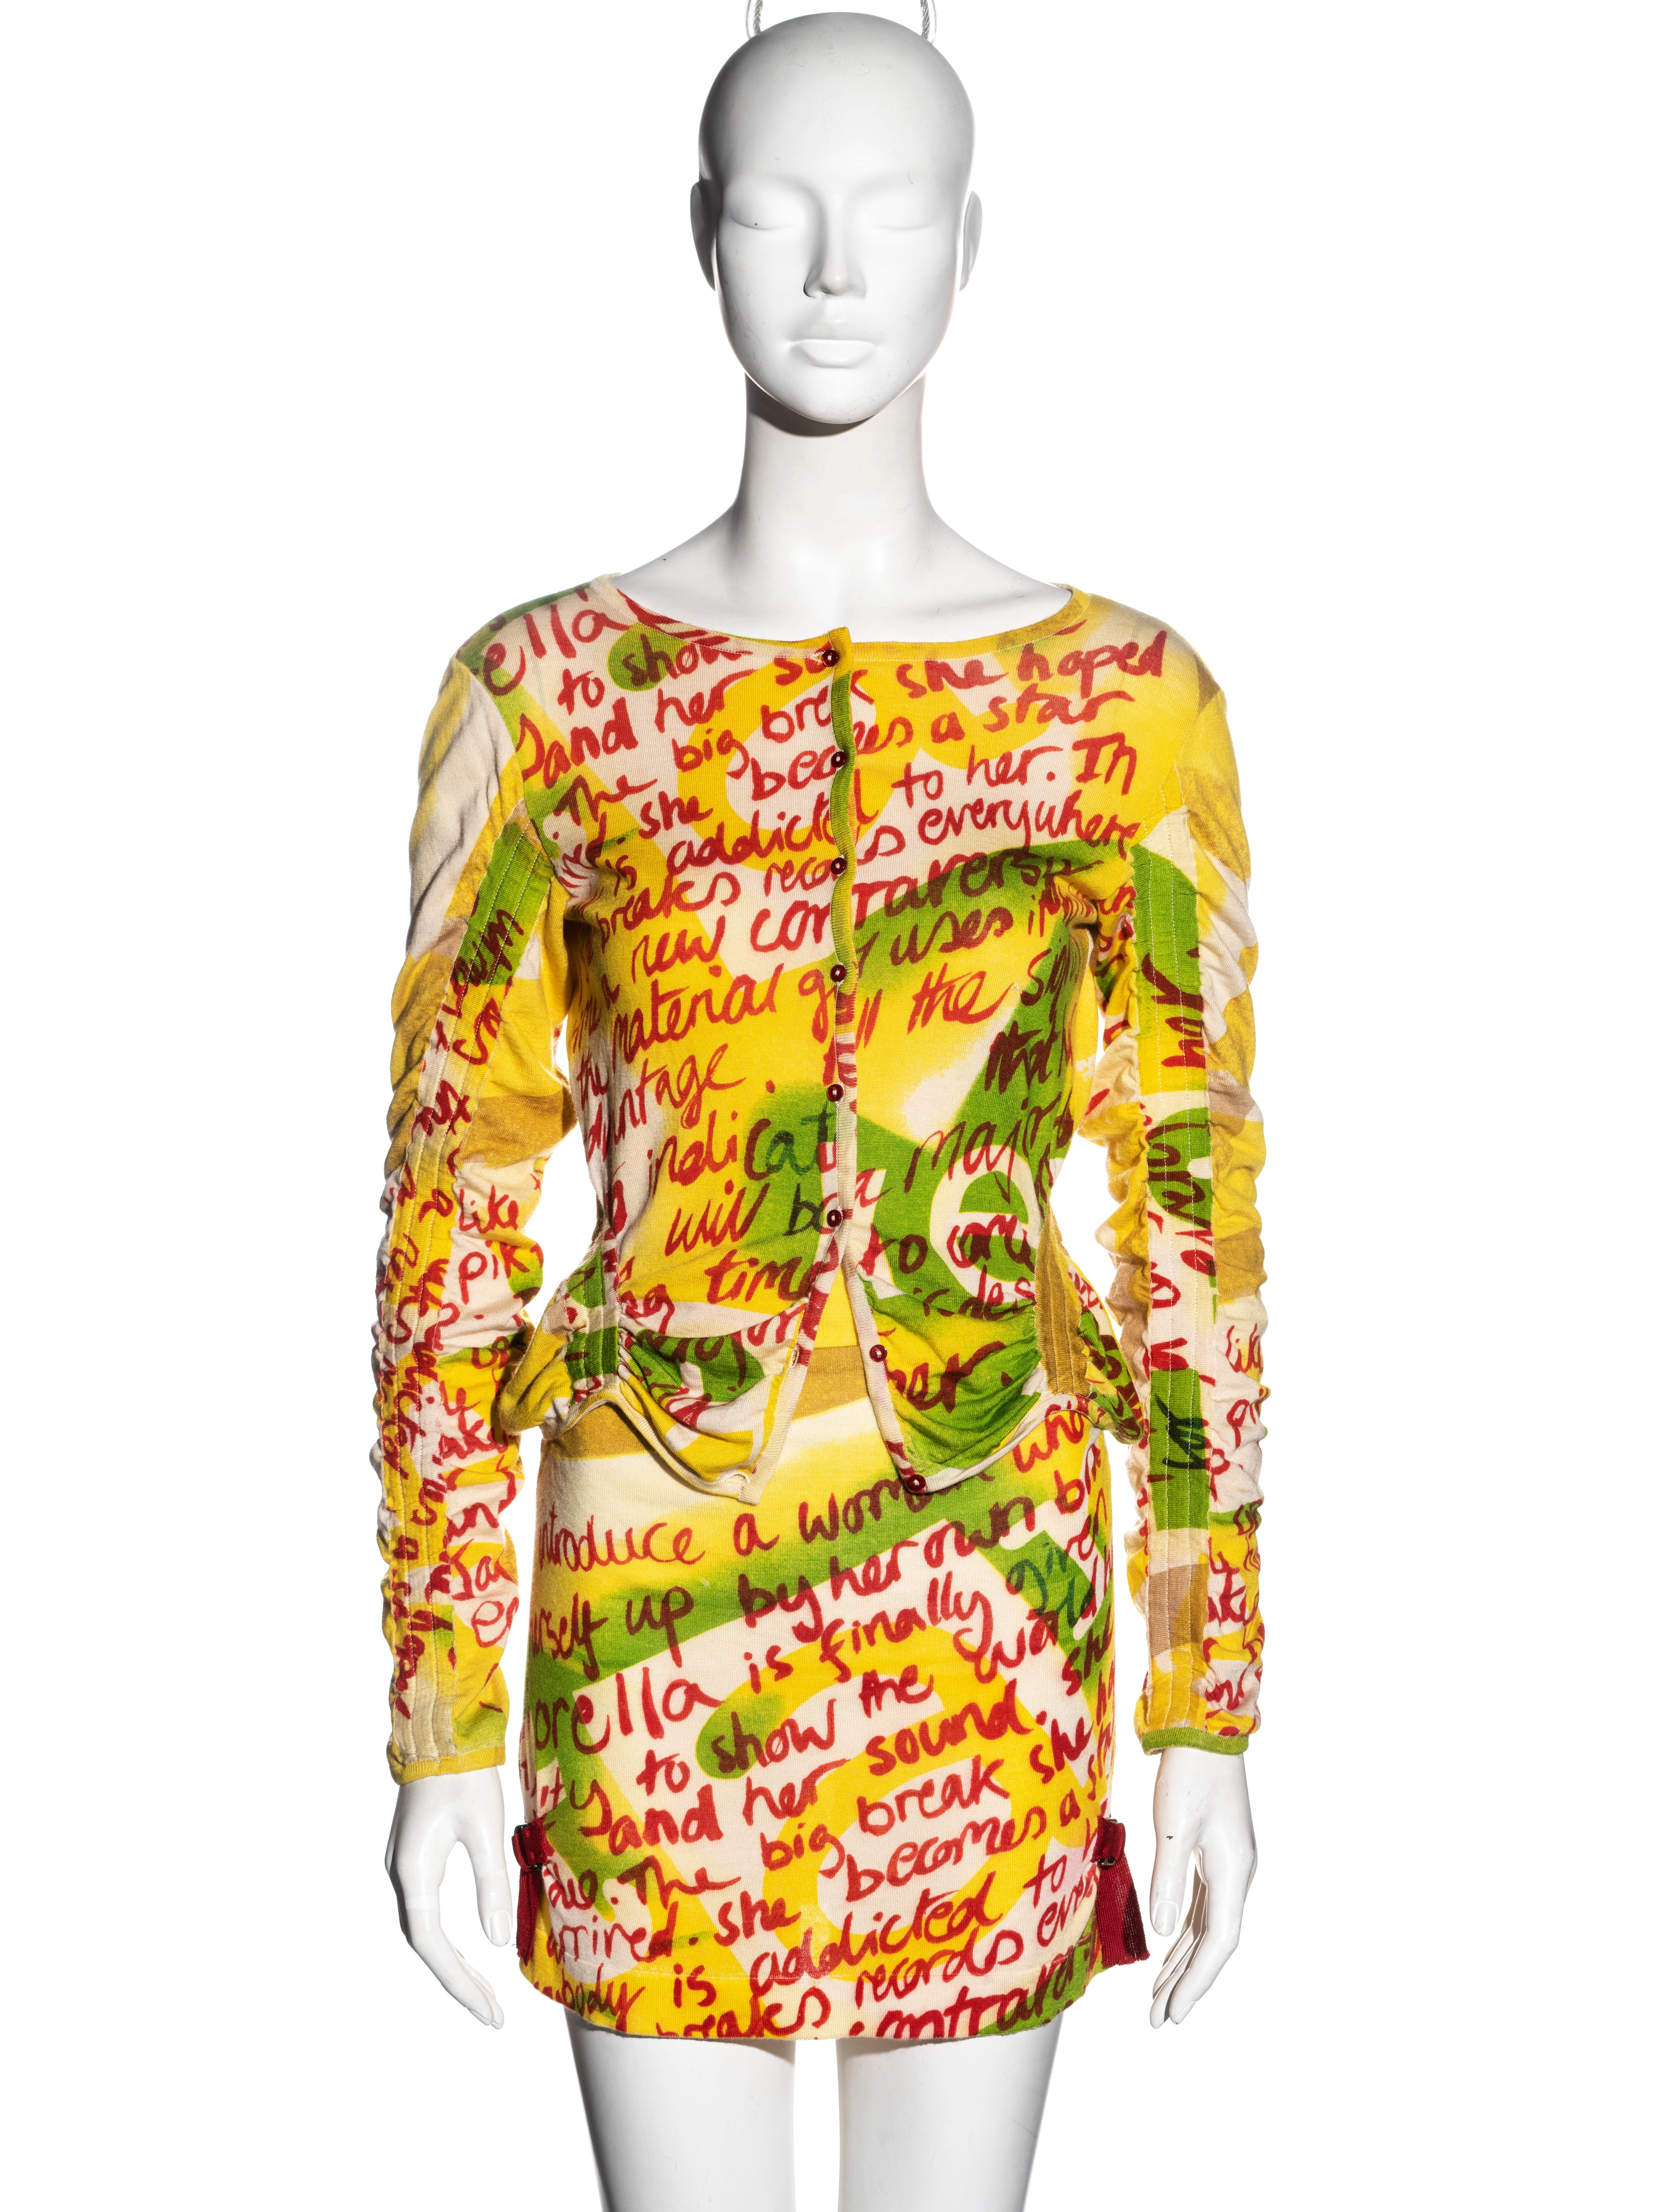 ▪ Christian Dior cardigan and mini skirt set
▪ Designed by John Galliano
▪ Yellow, green, red and cream graffiti print
▪ Ruched seams 
▪ Tie fastening at the skirt waist 
▪ Size approx. Small-Medium
▪ Spring-Summer 2003
▪ Made in France